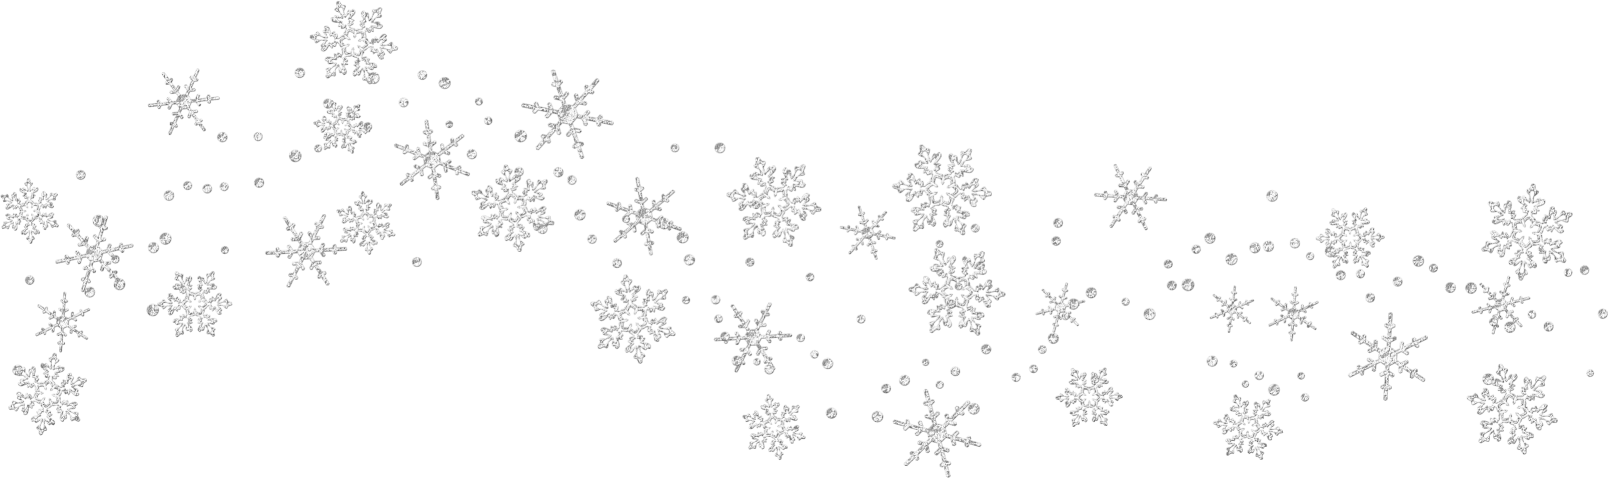 transparent background winter clipart png
